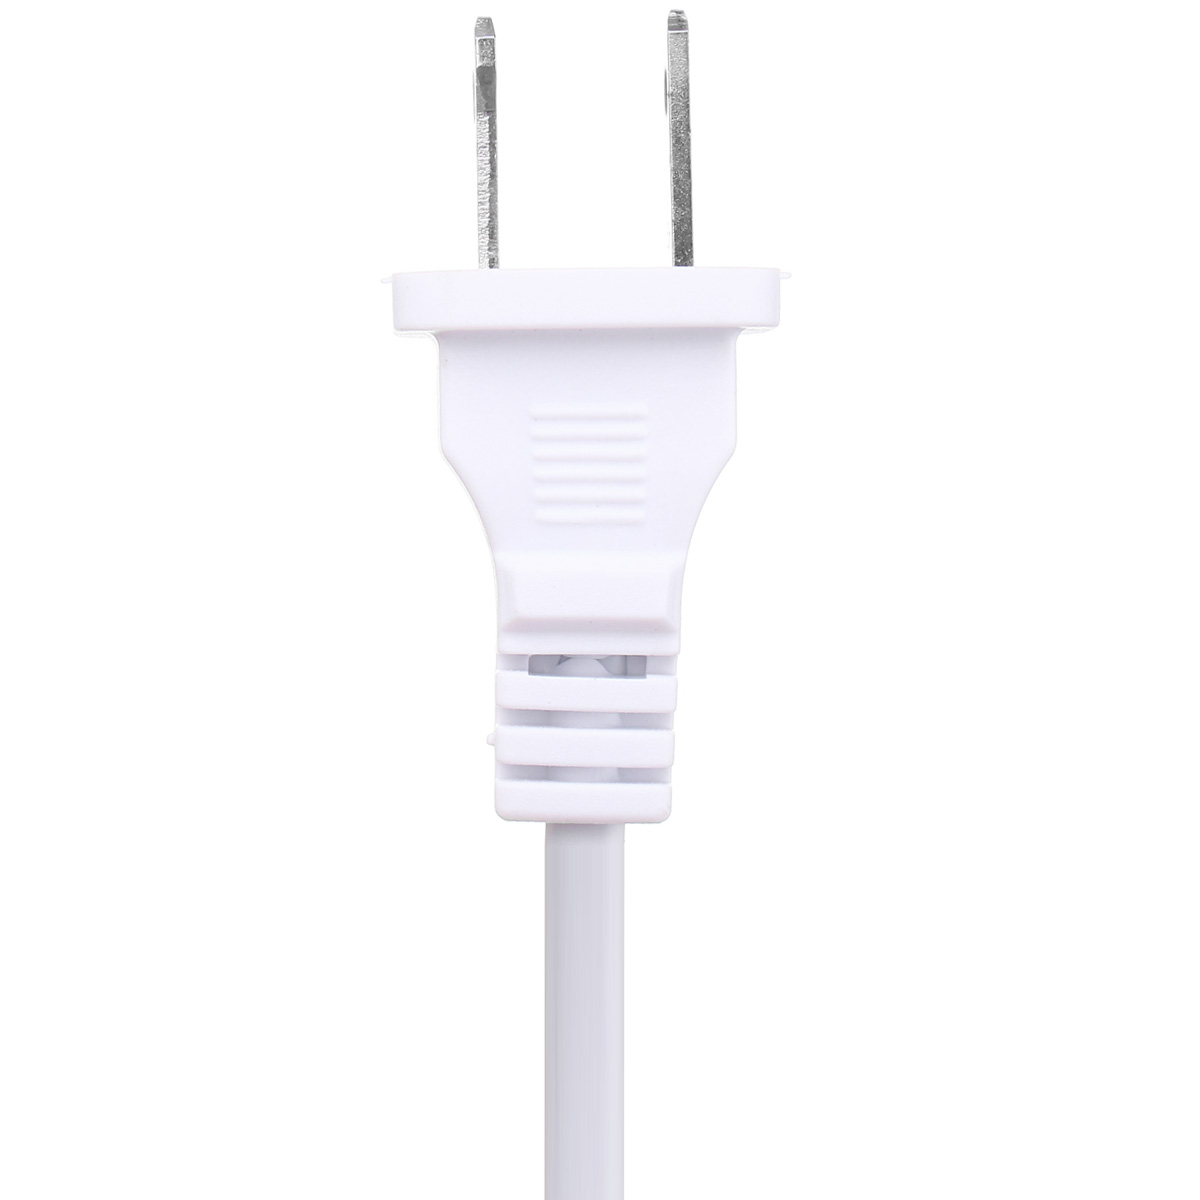 1M-E12-Socket-Bulb-Adapter-US-Plug-with-Dimmer-Cable-Cord-Switch-for-Himalayan-Salt-Lamp-Electric-1301444